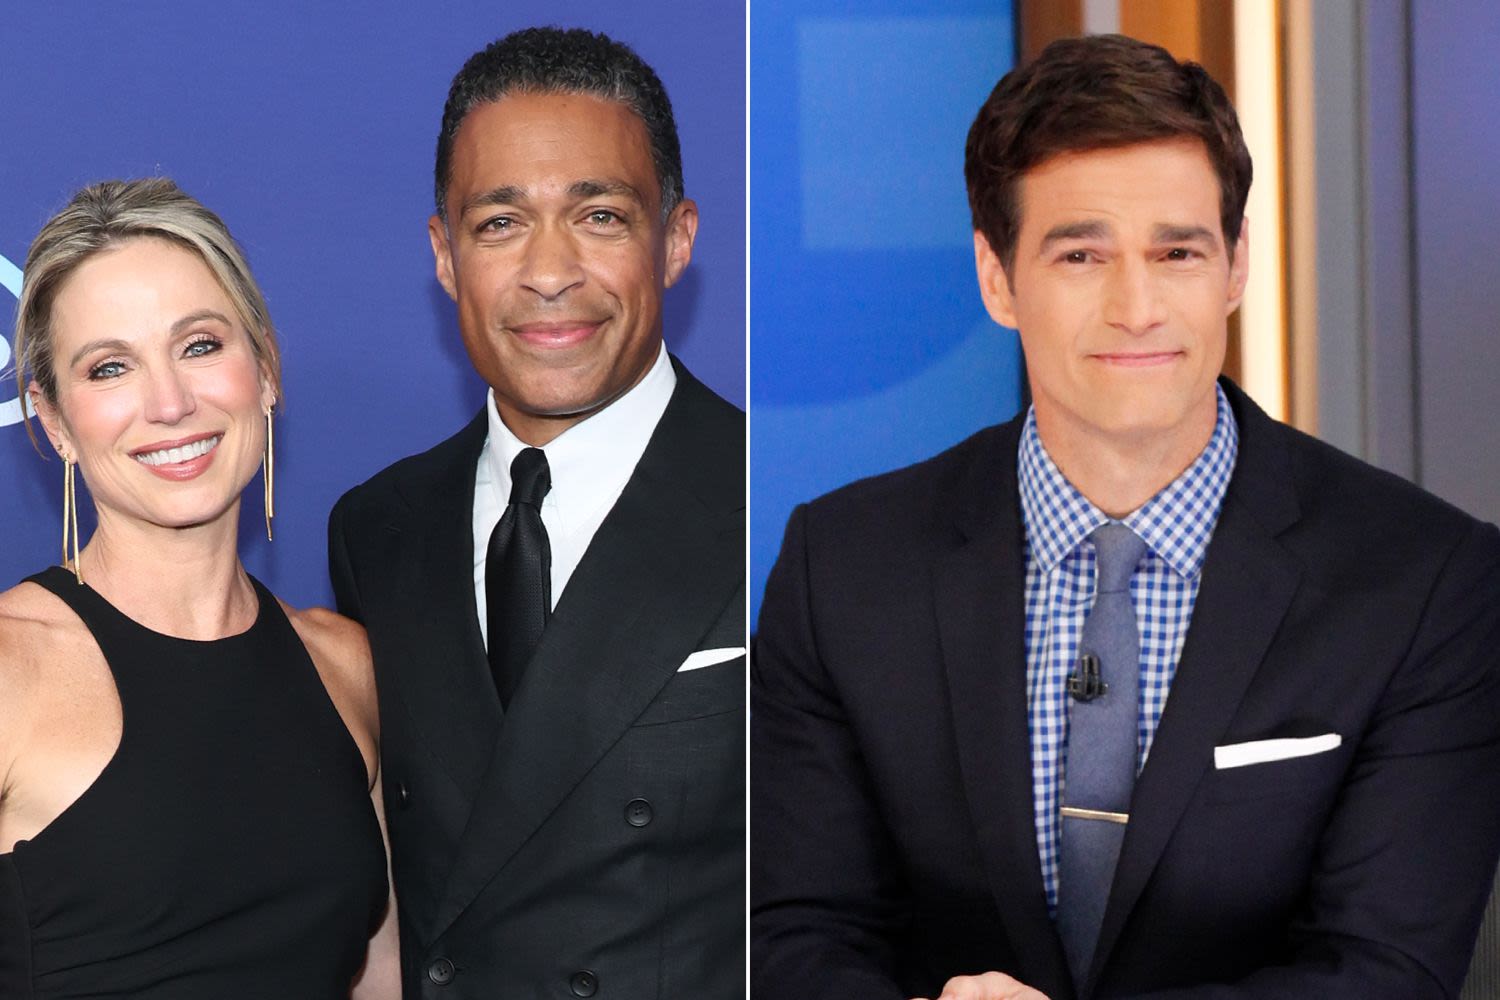 Amy Robach and T.J. Holmes Talk Rob Marciano's ABC Exit: 'We Know What It's Like to Have Your Life Upended'